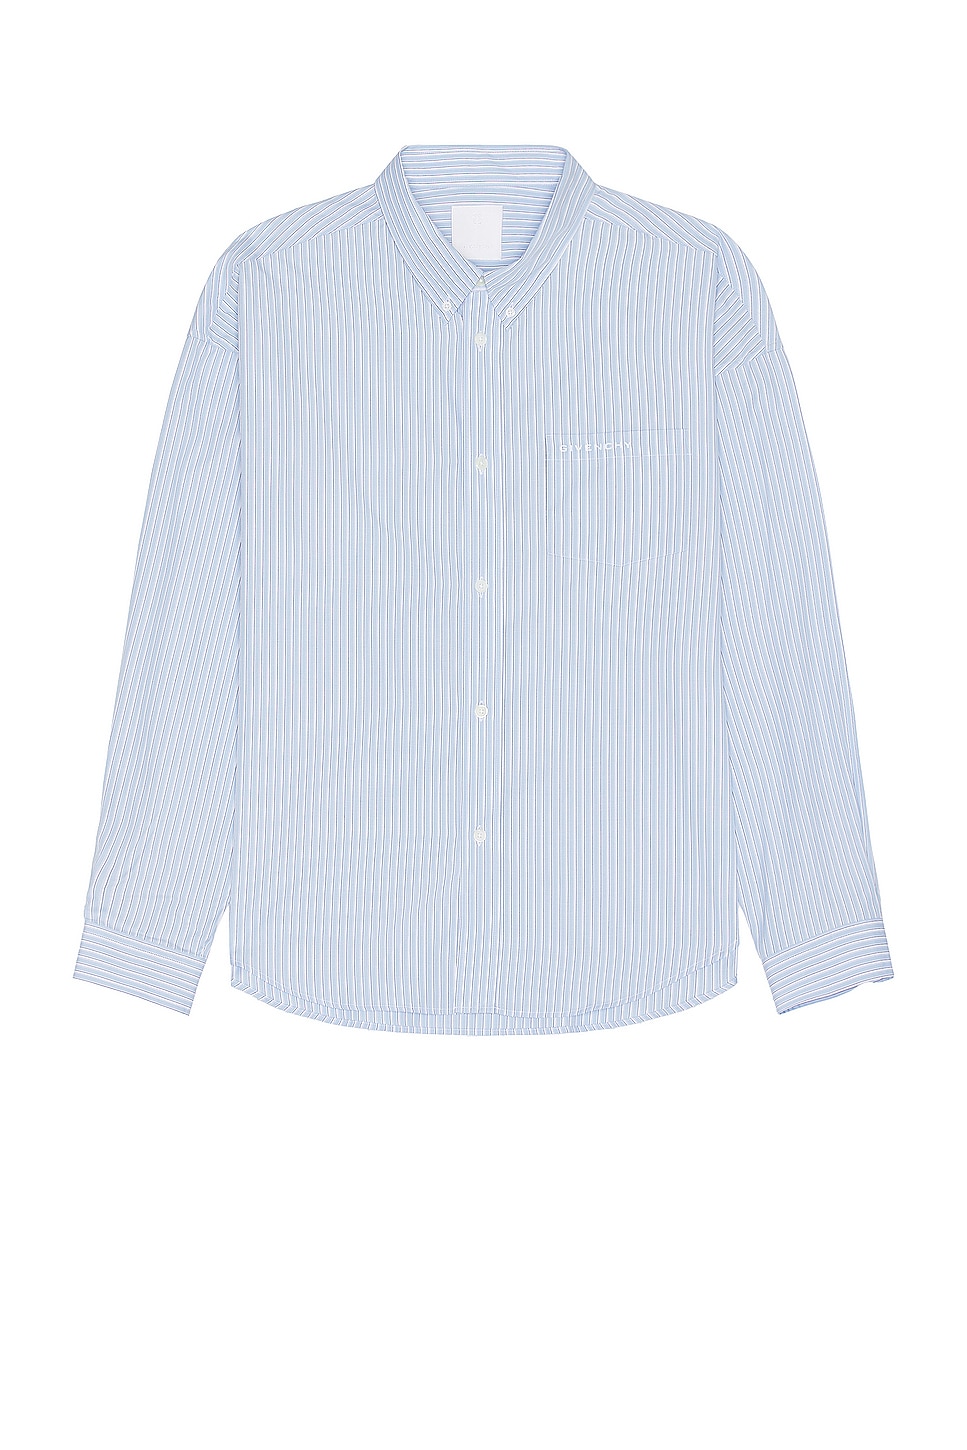 Image 1 of Givenchy Long Sleeve Shirt in Light Blue